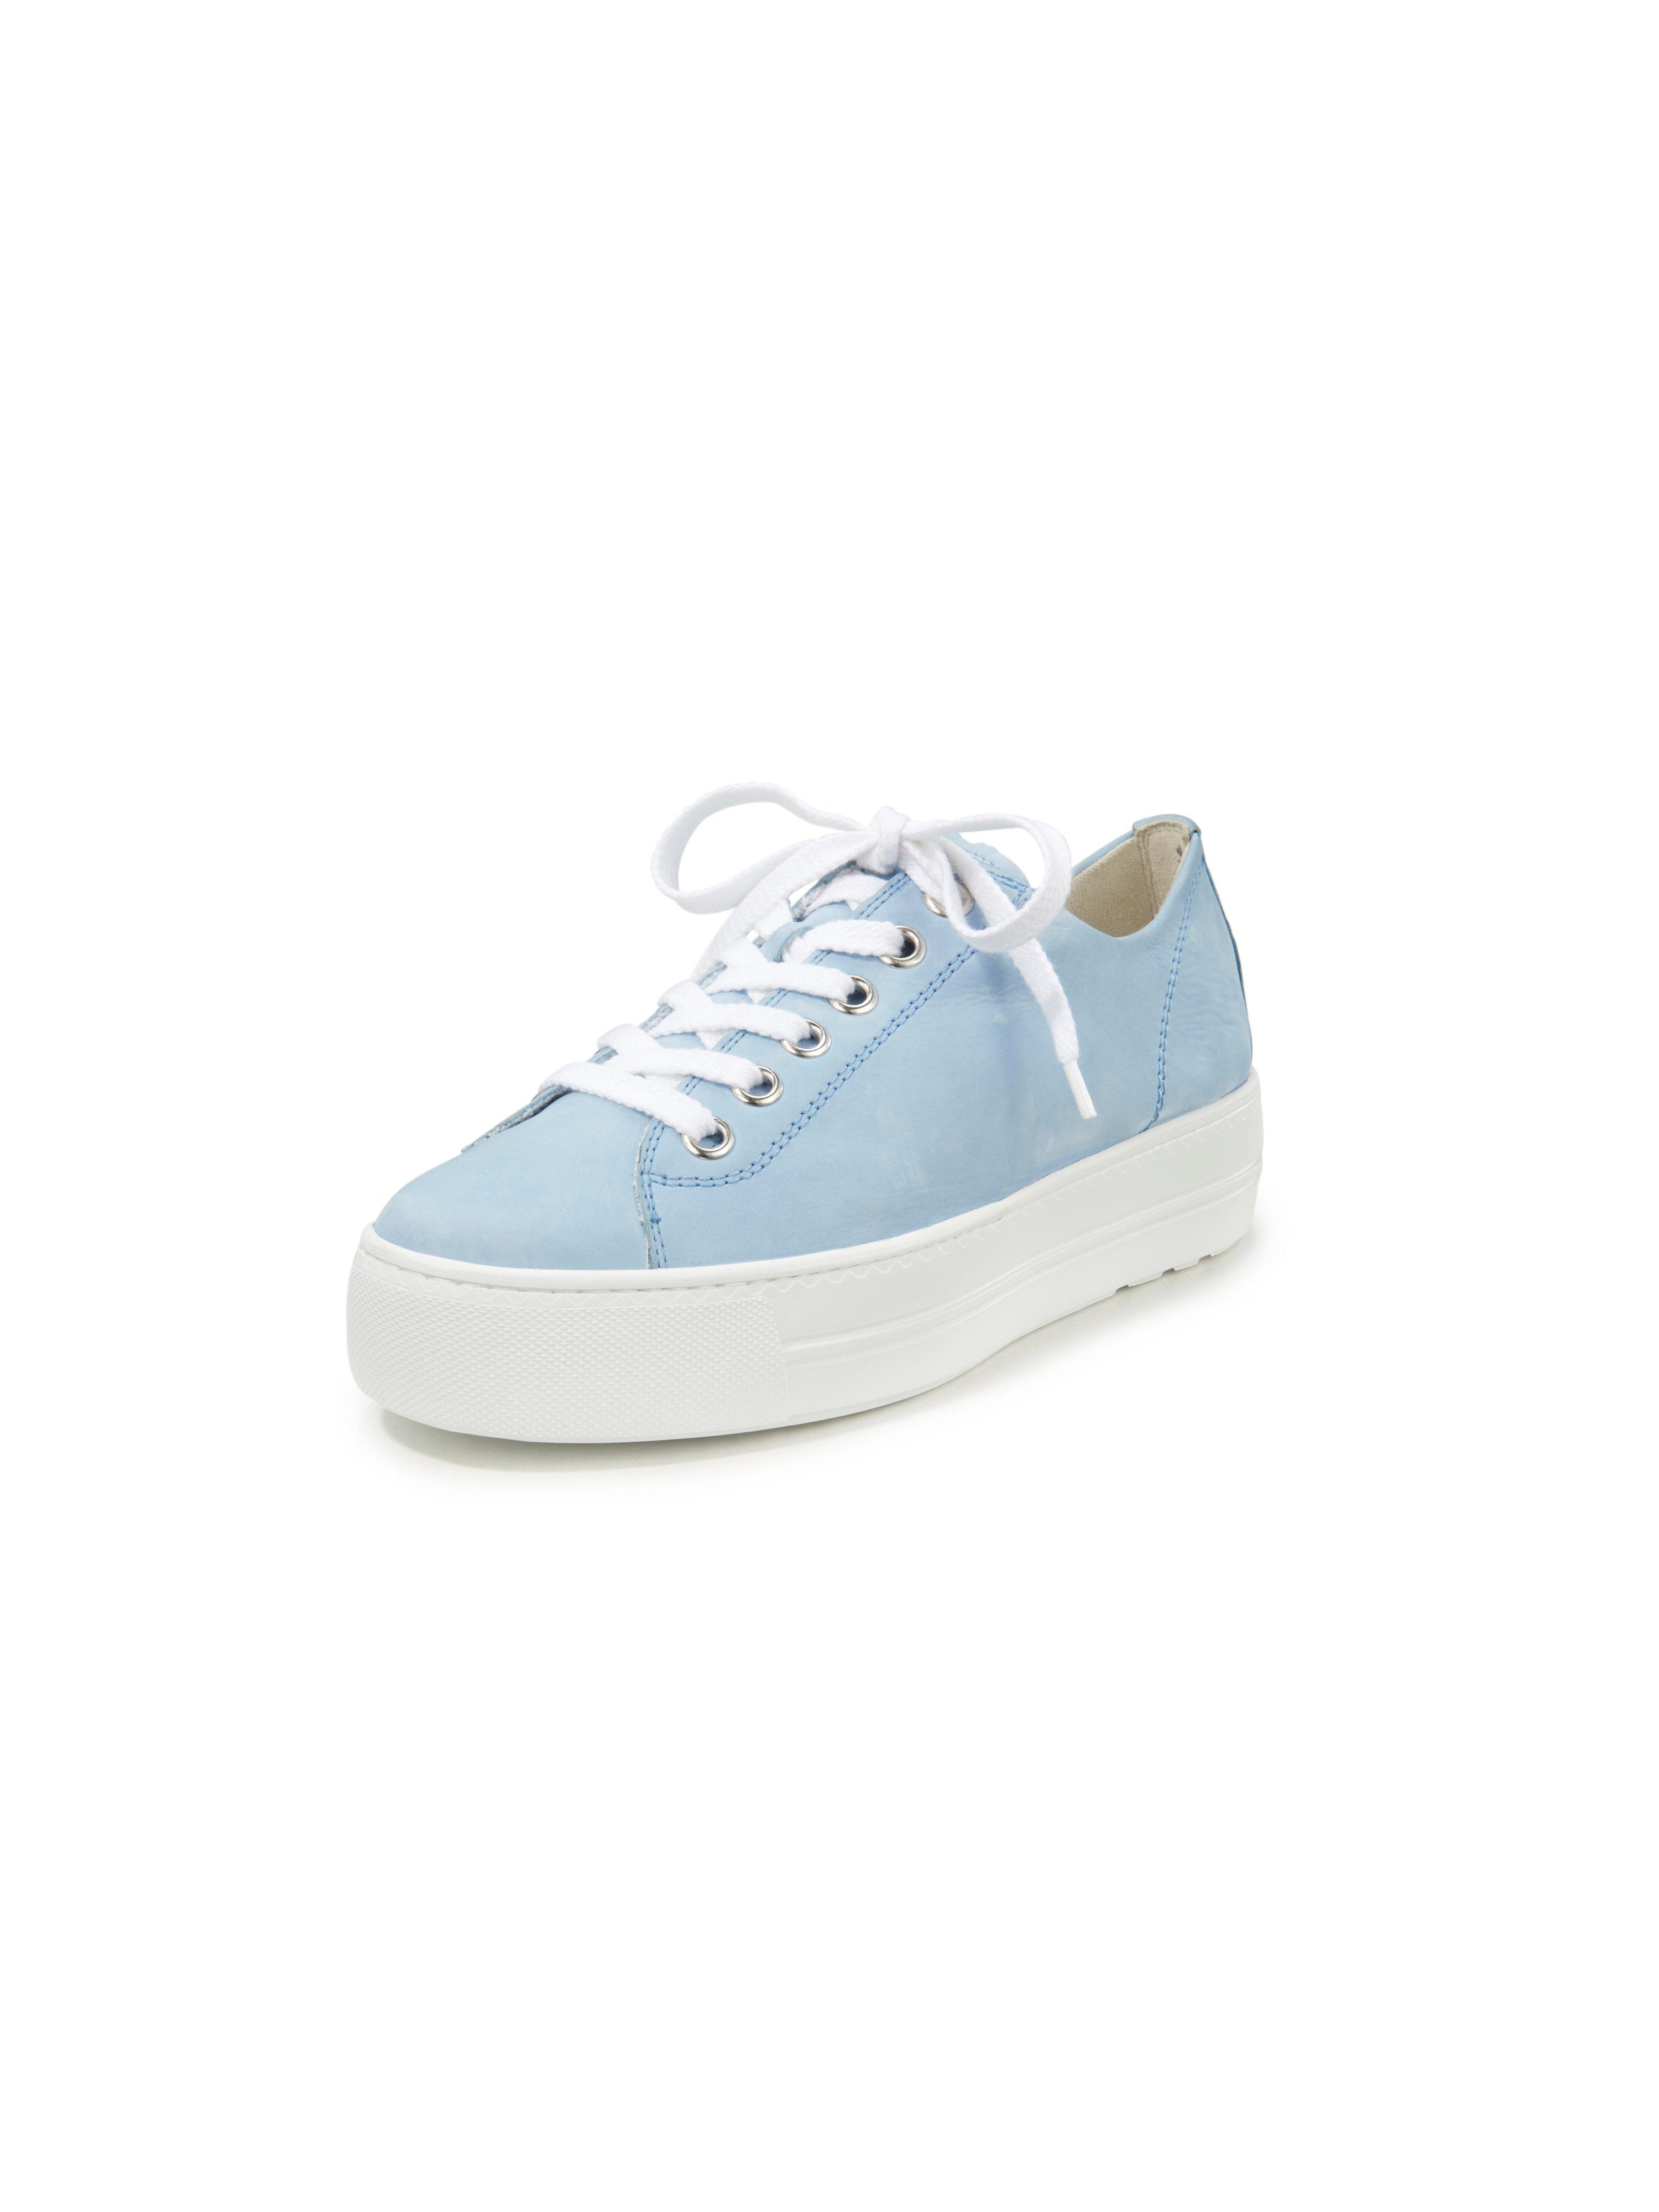 Paul Green - Platform sneakers with terry lining - light blue